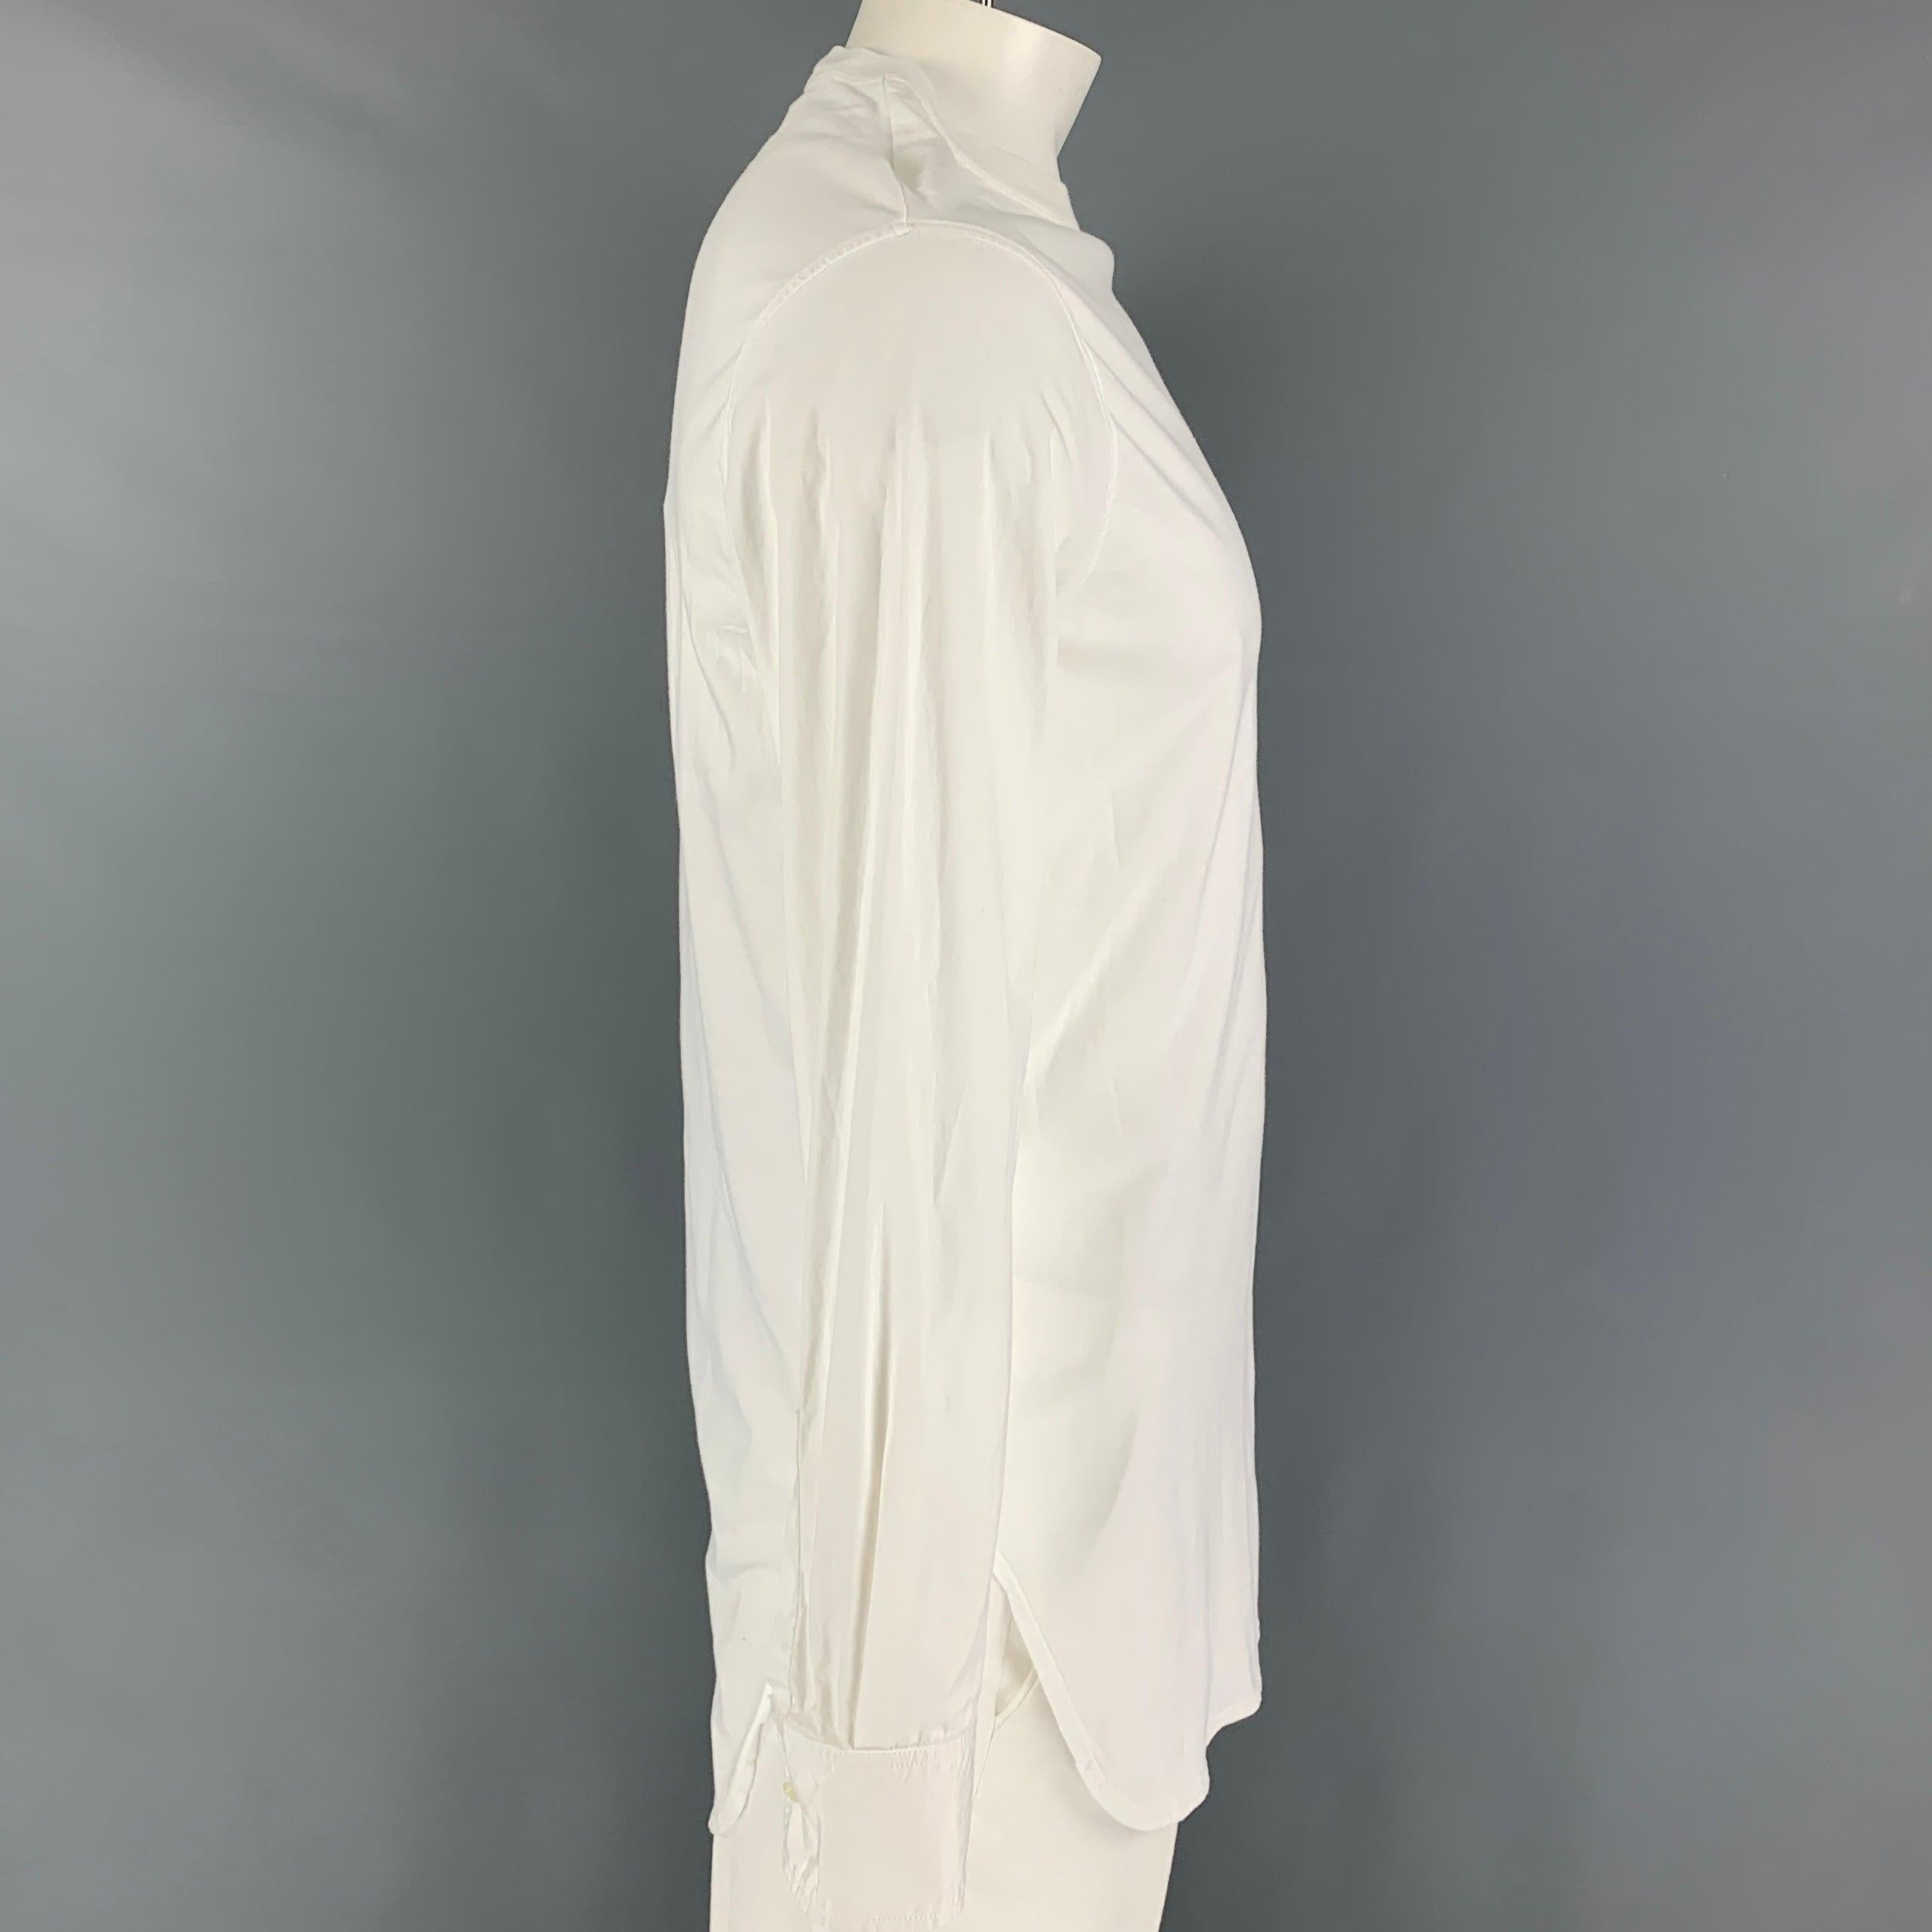 DSQUARED2 t-shirt comes in a white cotton featuring dress shirt sleeves, long back panel, and a crew-neck. Made in Italy.
Very Good
Pre-Owned Condition. 

Marked:   L  

Measurements: 
 
Shoulder: 18.5 inches Chest: 40 inches Sleeve: 26.5 inches